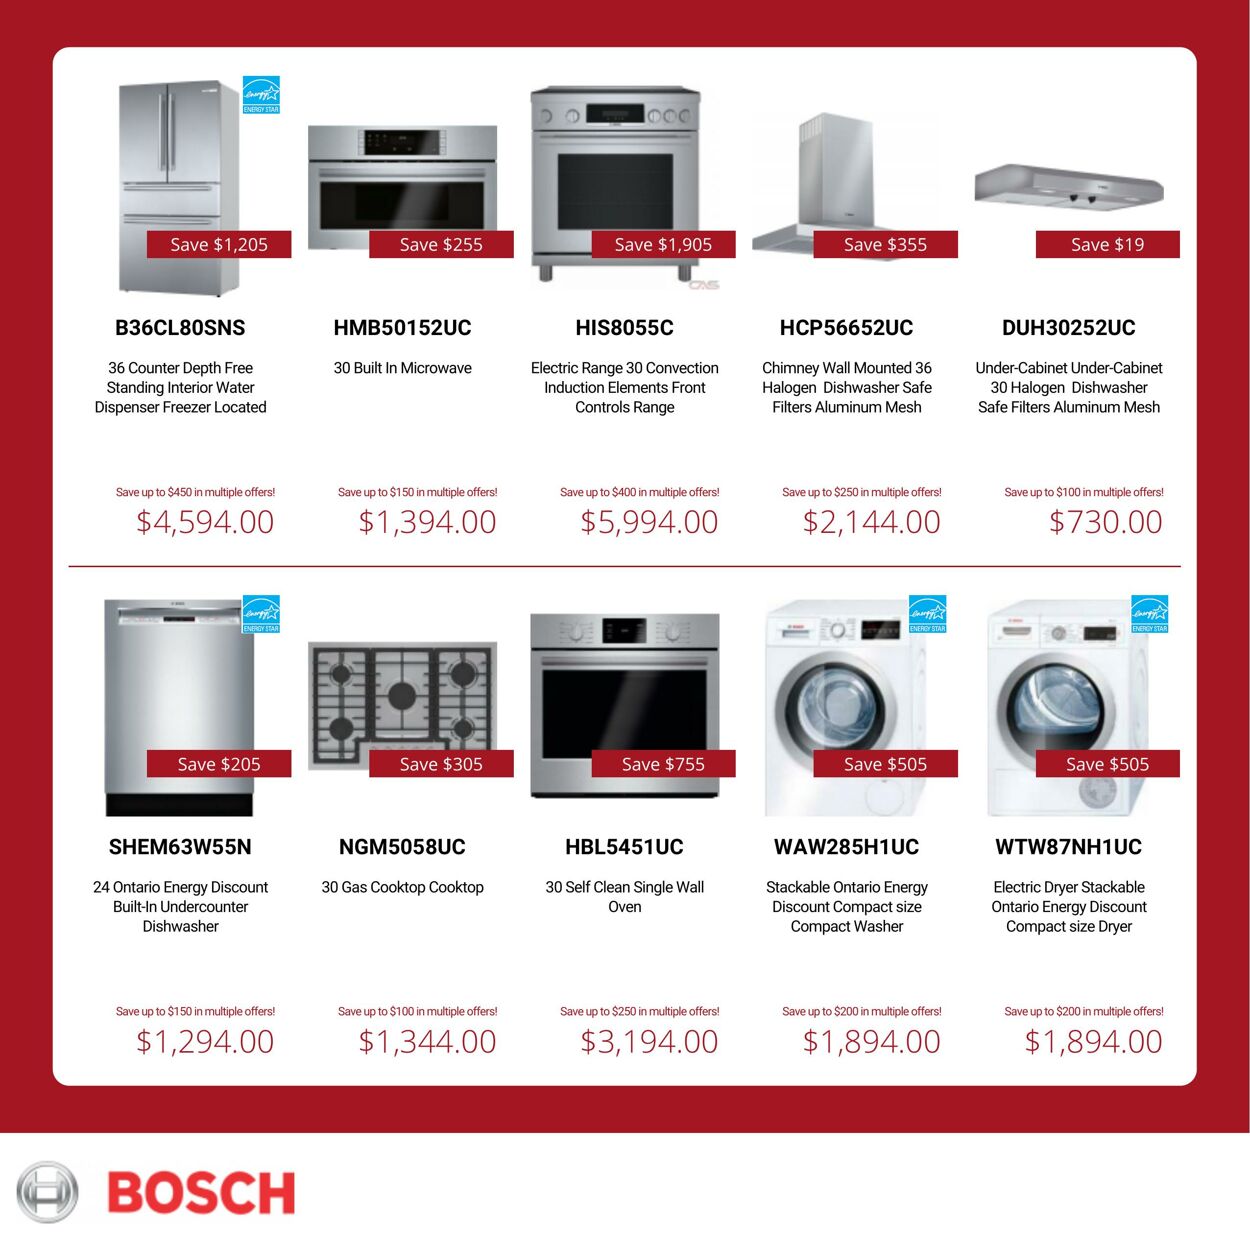 Flyer Canadian Appliance Source 13.10.2022 - 19.10.2022